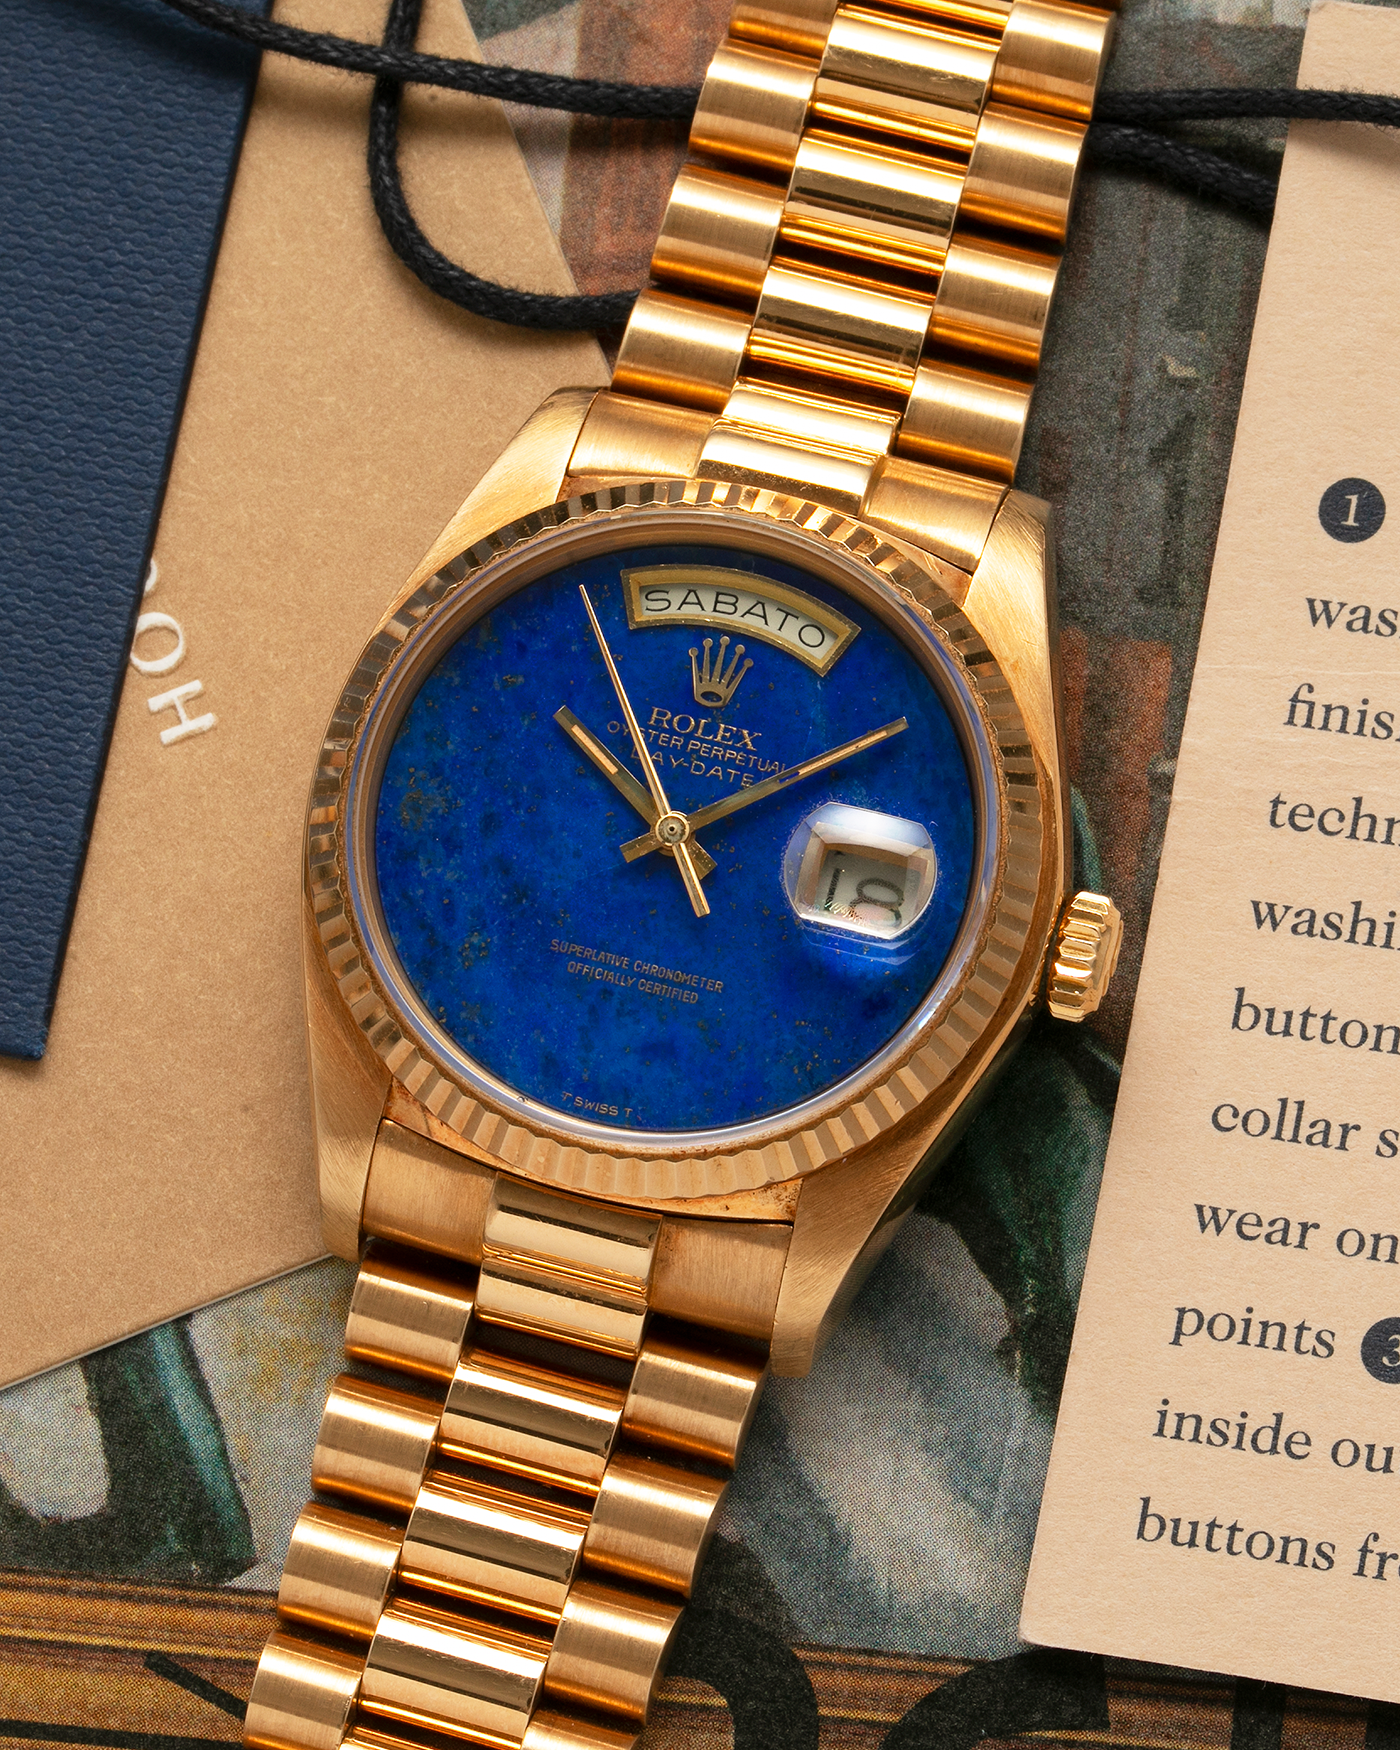 Brand: Rolex Year: 1979 Model: Day-Date, ‘Lapis Lazuli’ Reference Number: 18038 Serial: 612XXXX Material: 18-carat Yellow Gold Movement: Rolex Cal. 3055, Self-Winding Case Diameter: 36mm Lug Width: 20mm Bracelet: Rolex ‘8385’ 18-carat Solid Gold Presidential Bracelet with ‘55’ Curved End Links